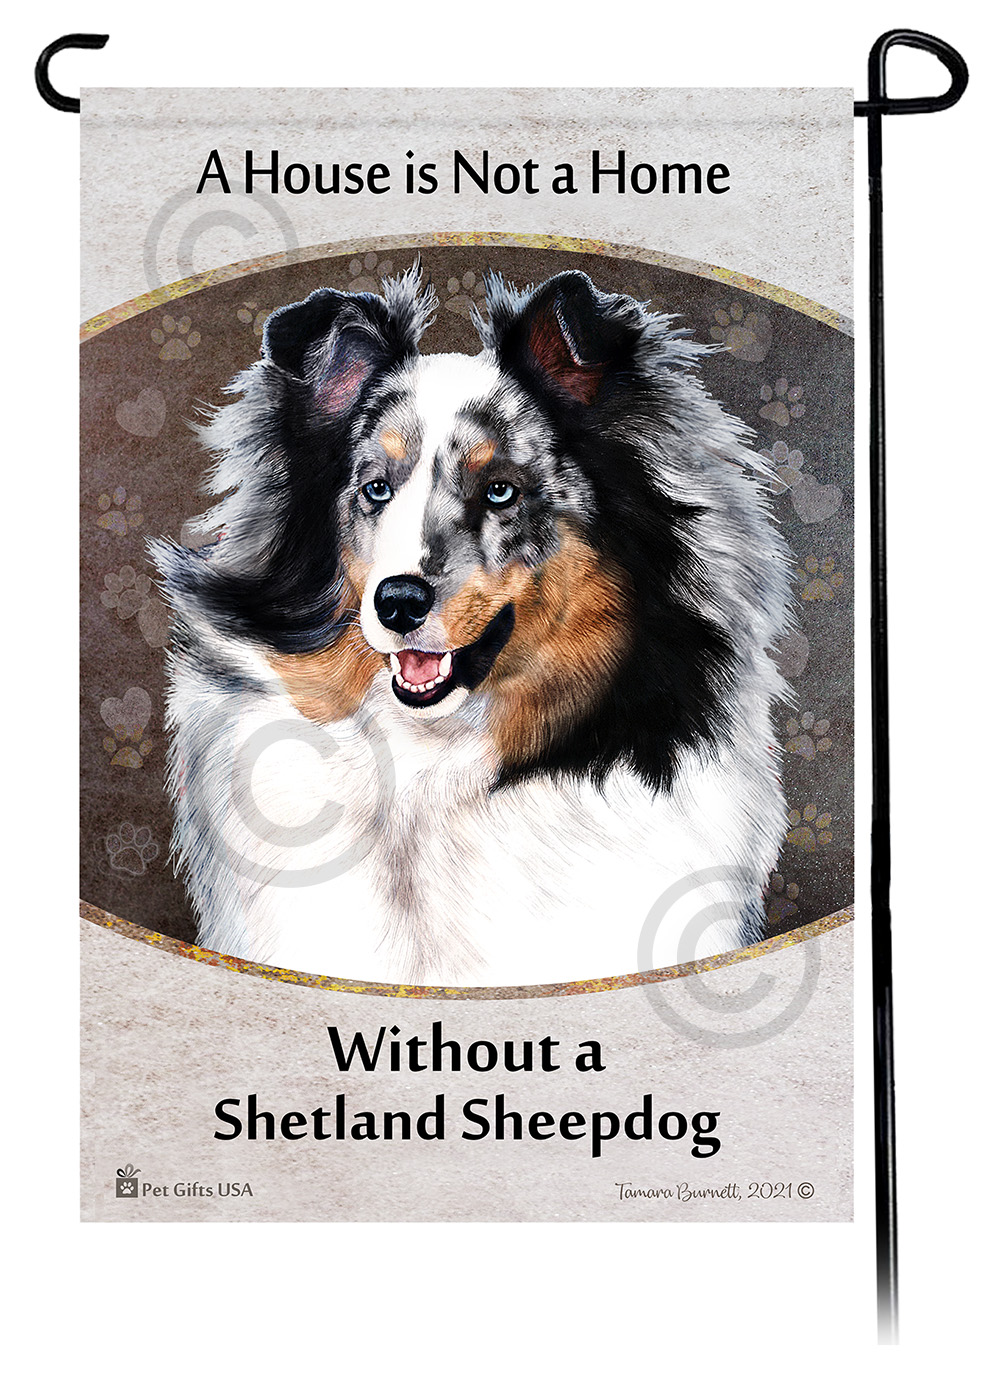 Sheltie Blue Merle A House Is Not A Home - Garden Flag Image